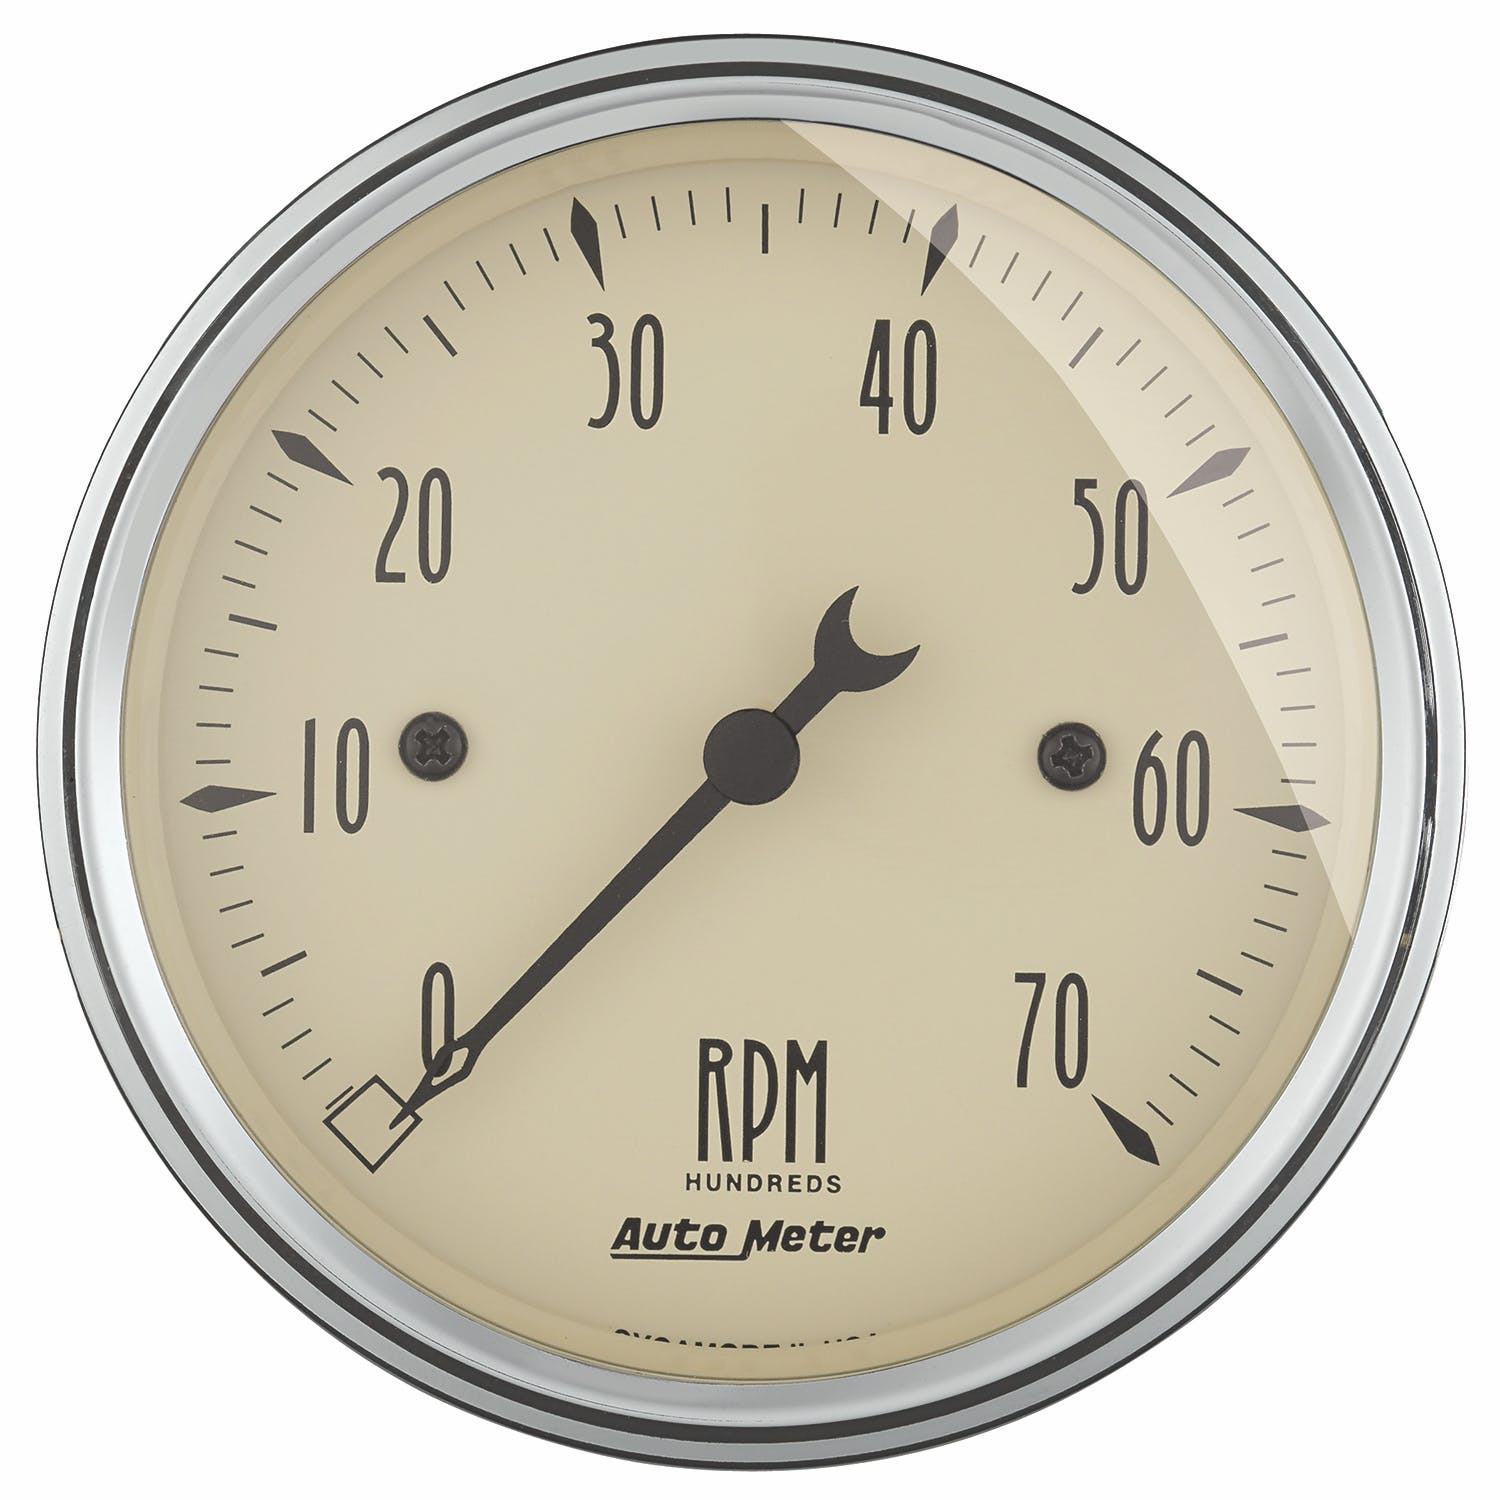 AutoMeter Products 1898 Tachometer 7000 Rpm